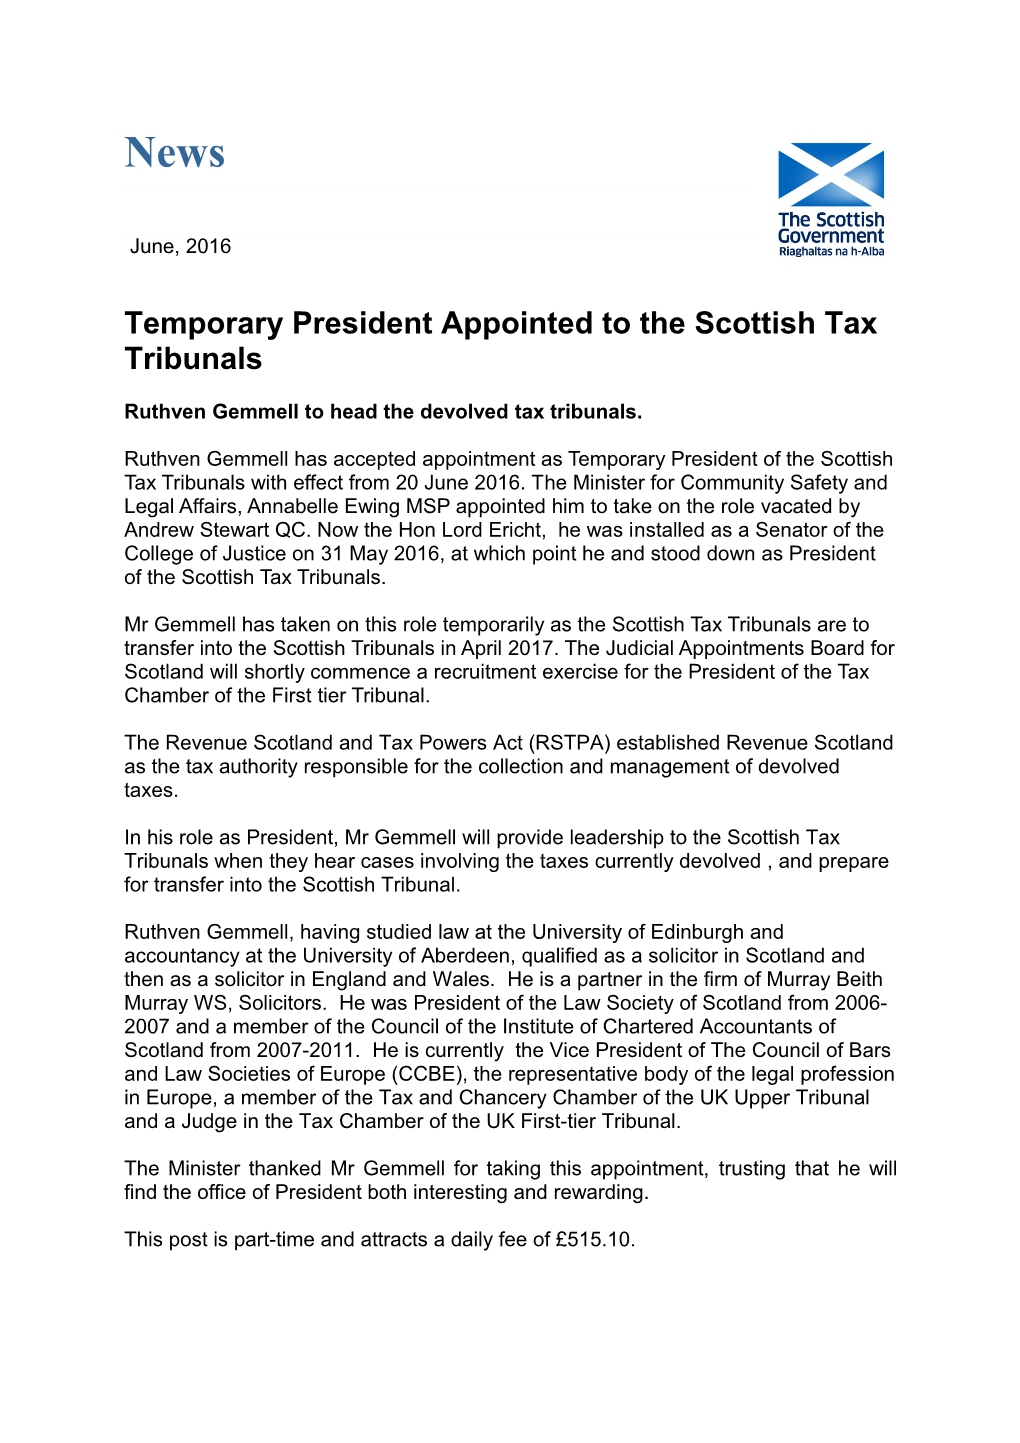 Temporary President Appointed to the Scottish Tax Tribunals